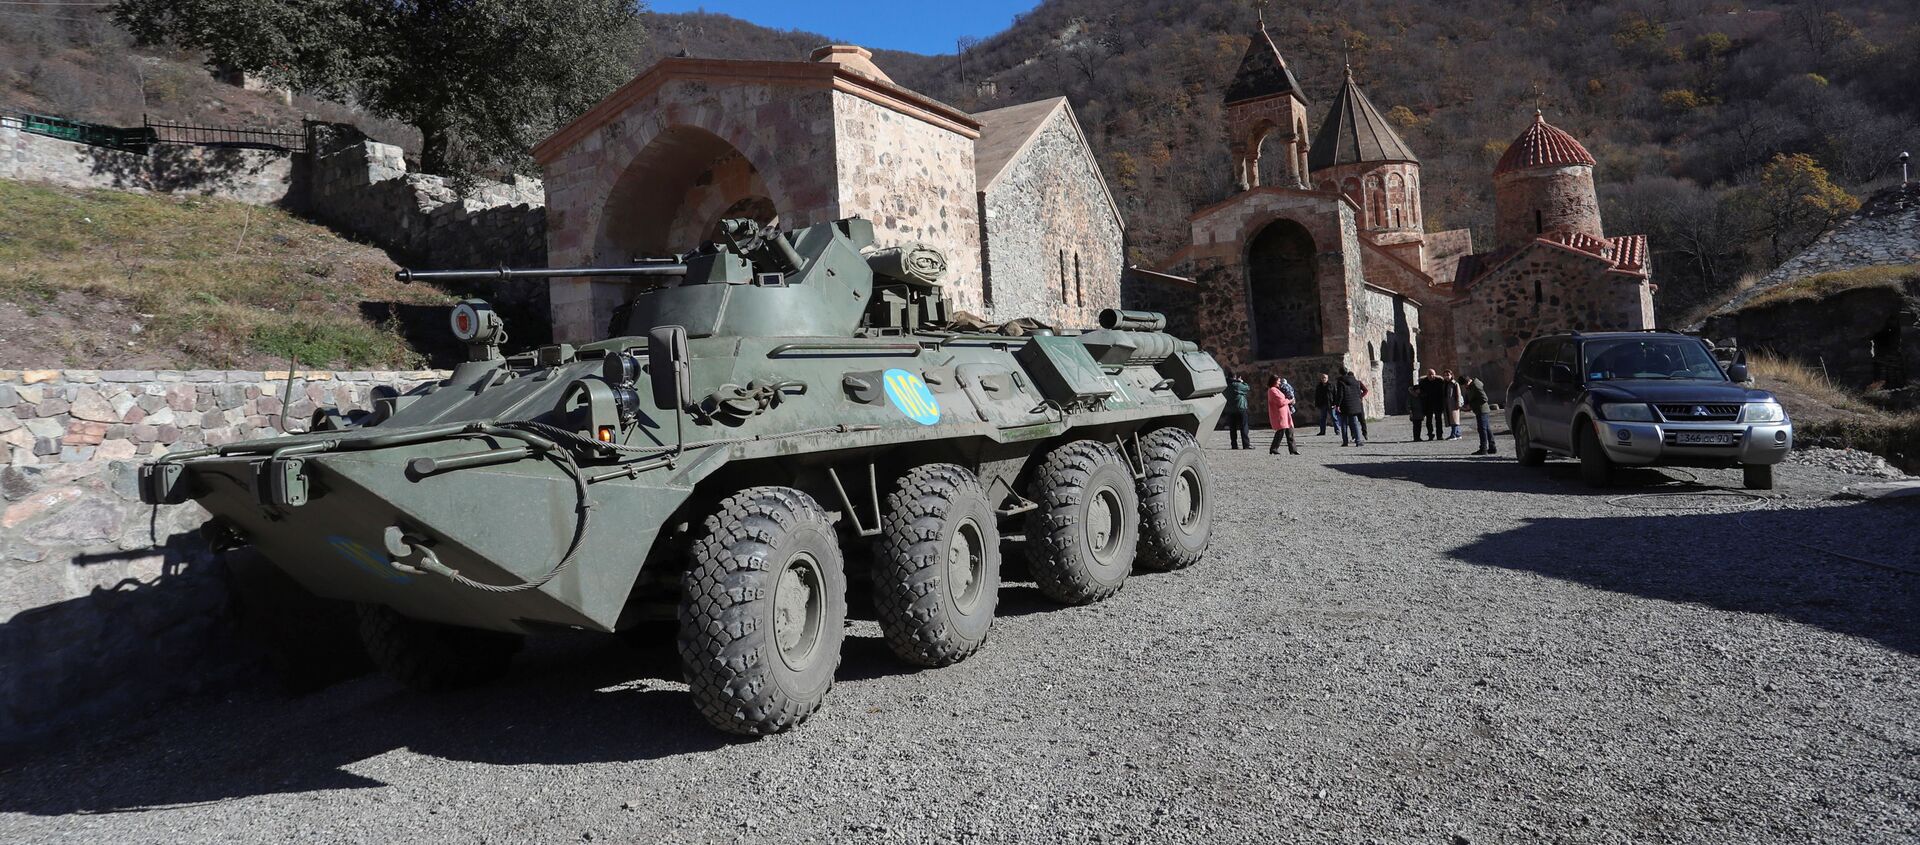 A view shows an armoured personnel carrier of the Russian peacekeeping forces near Dadivank Monastery in the region of Nagorno-Karabakh, November 24, 2020 - Sputnik International, 1920, 22.12.2020